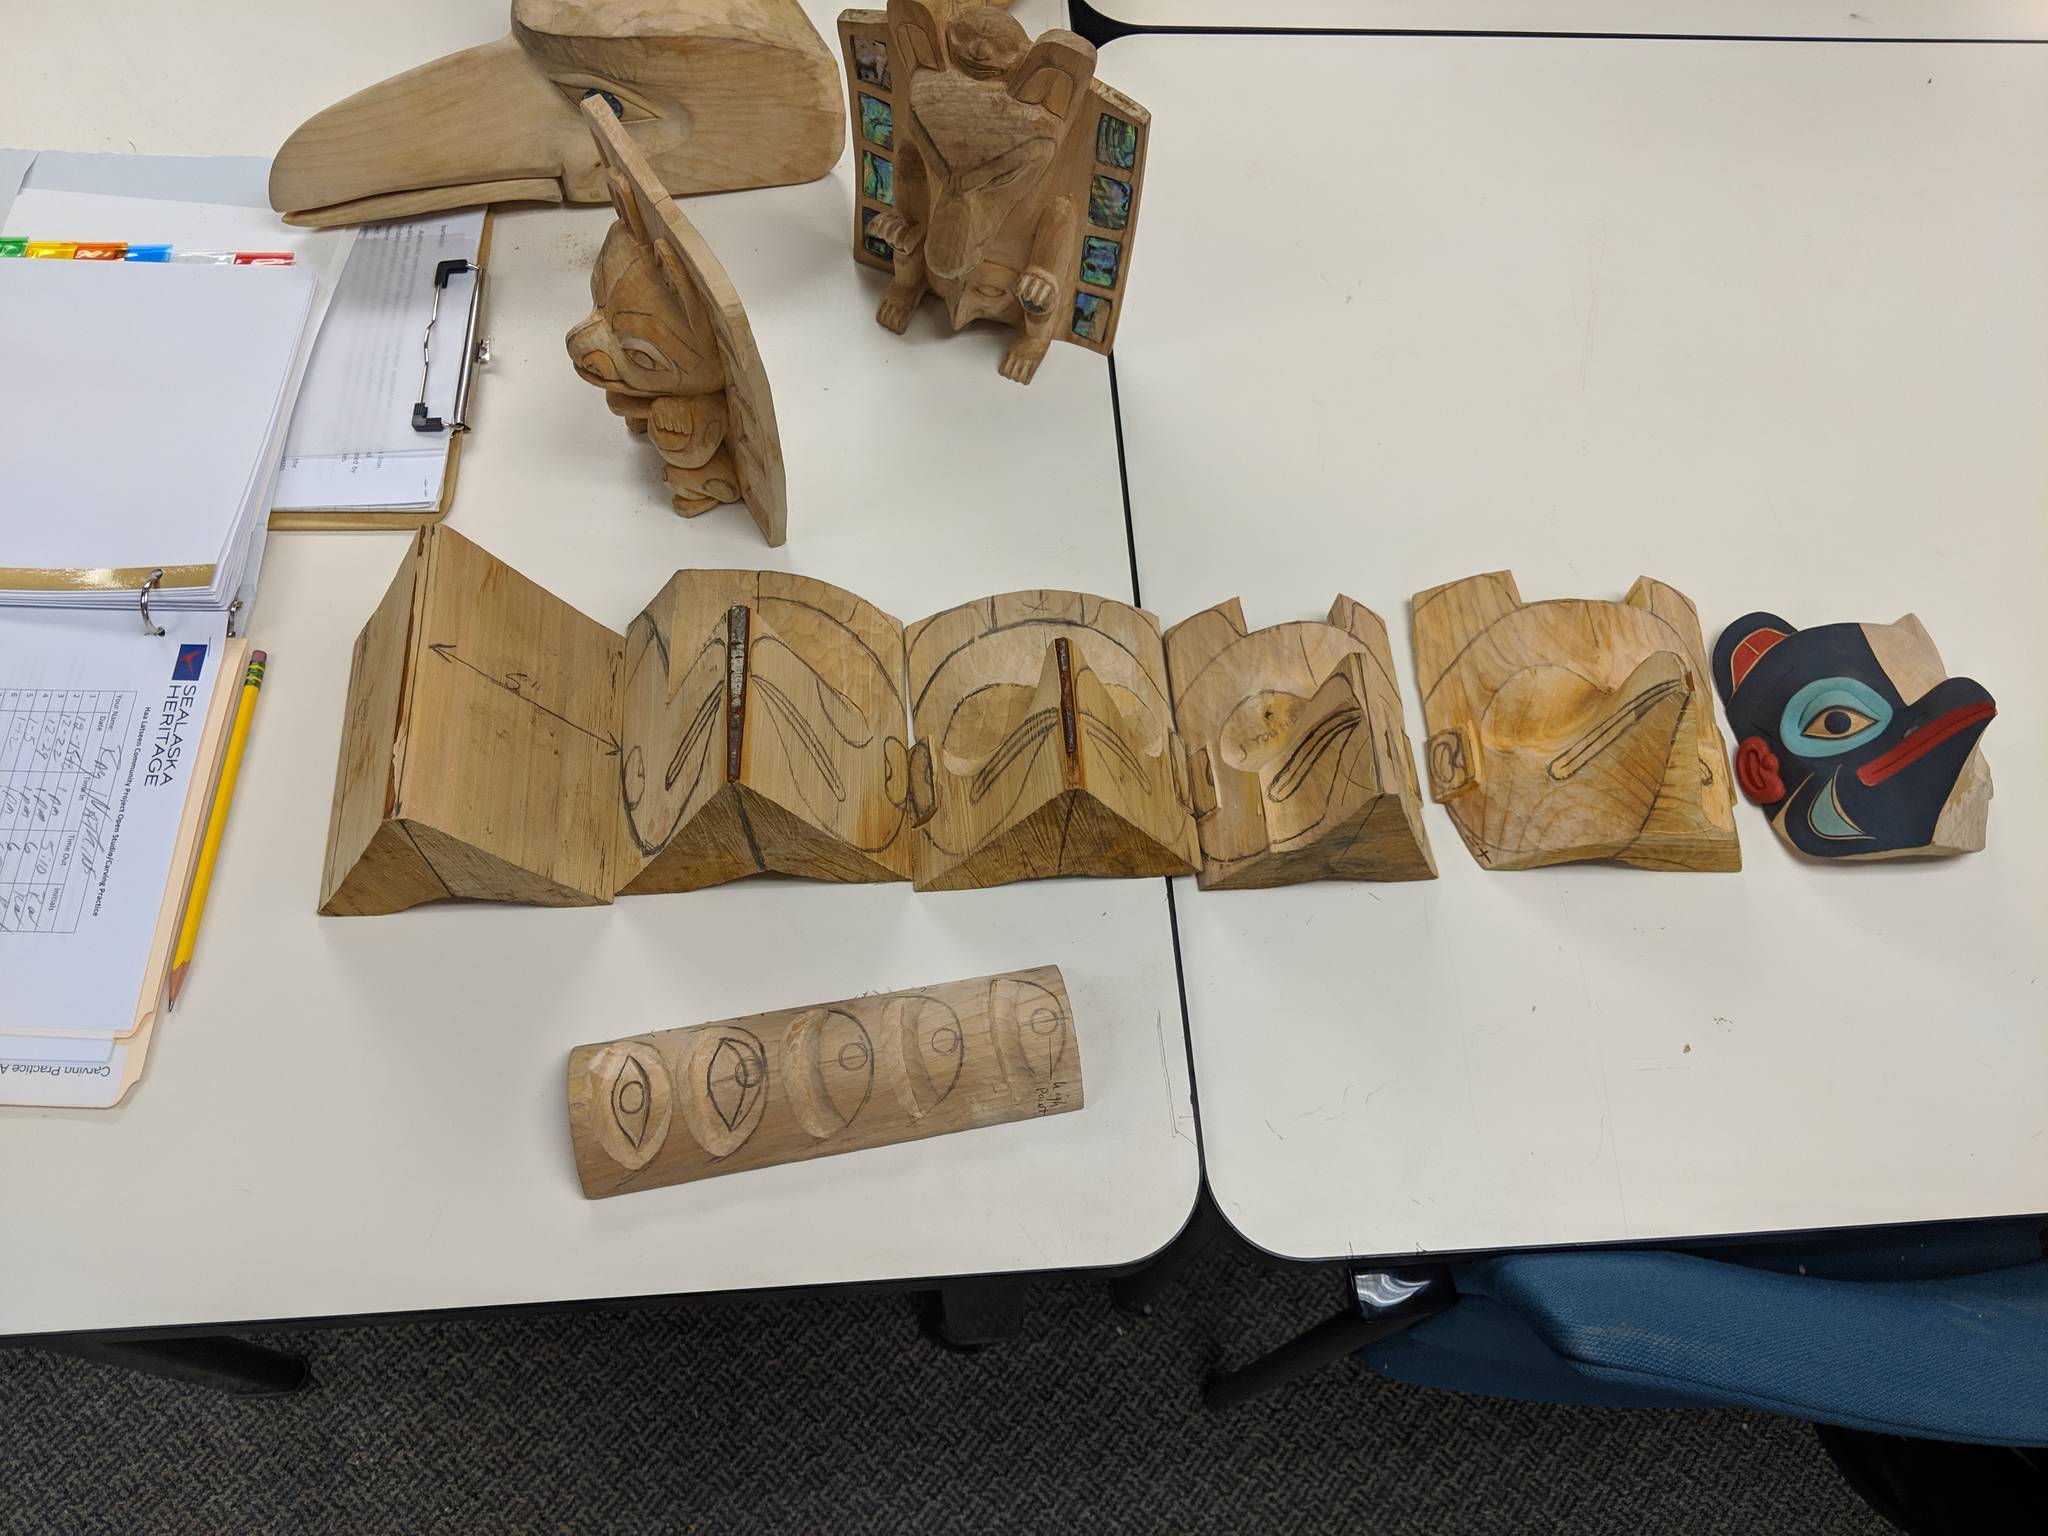 Ray Watkins uses models when he teaches carving classes. The models were present for carving practice, Saturday, Jan. 12, 2019. The practices are offered through Sealaska Heritage Institute. (Ben Hohenstatt | Capital City Weekly)